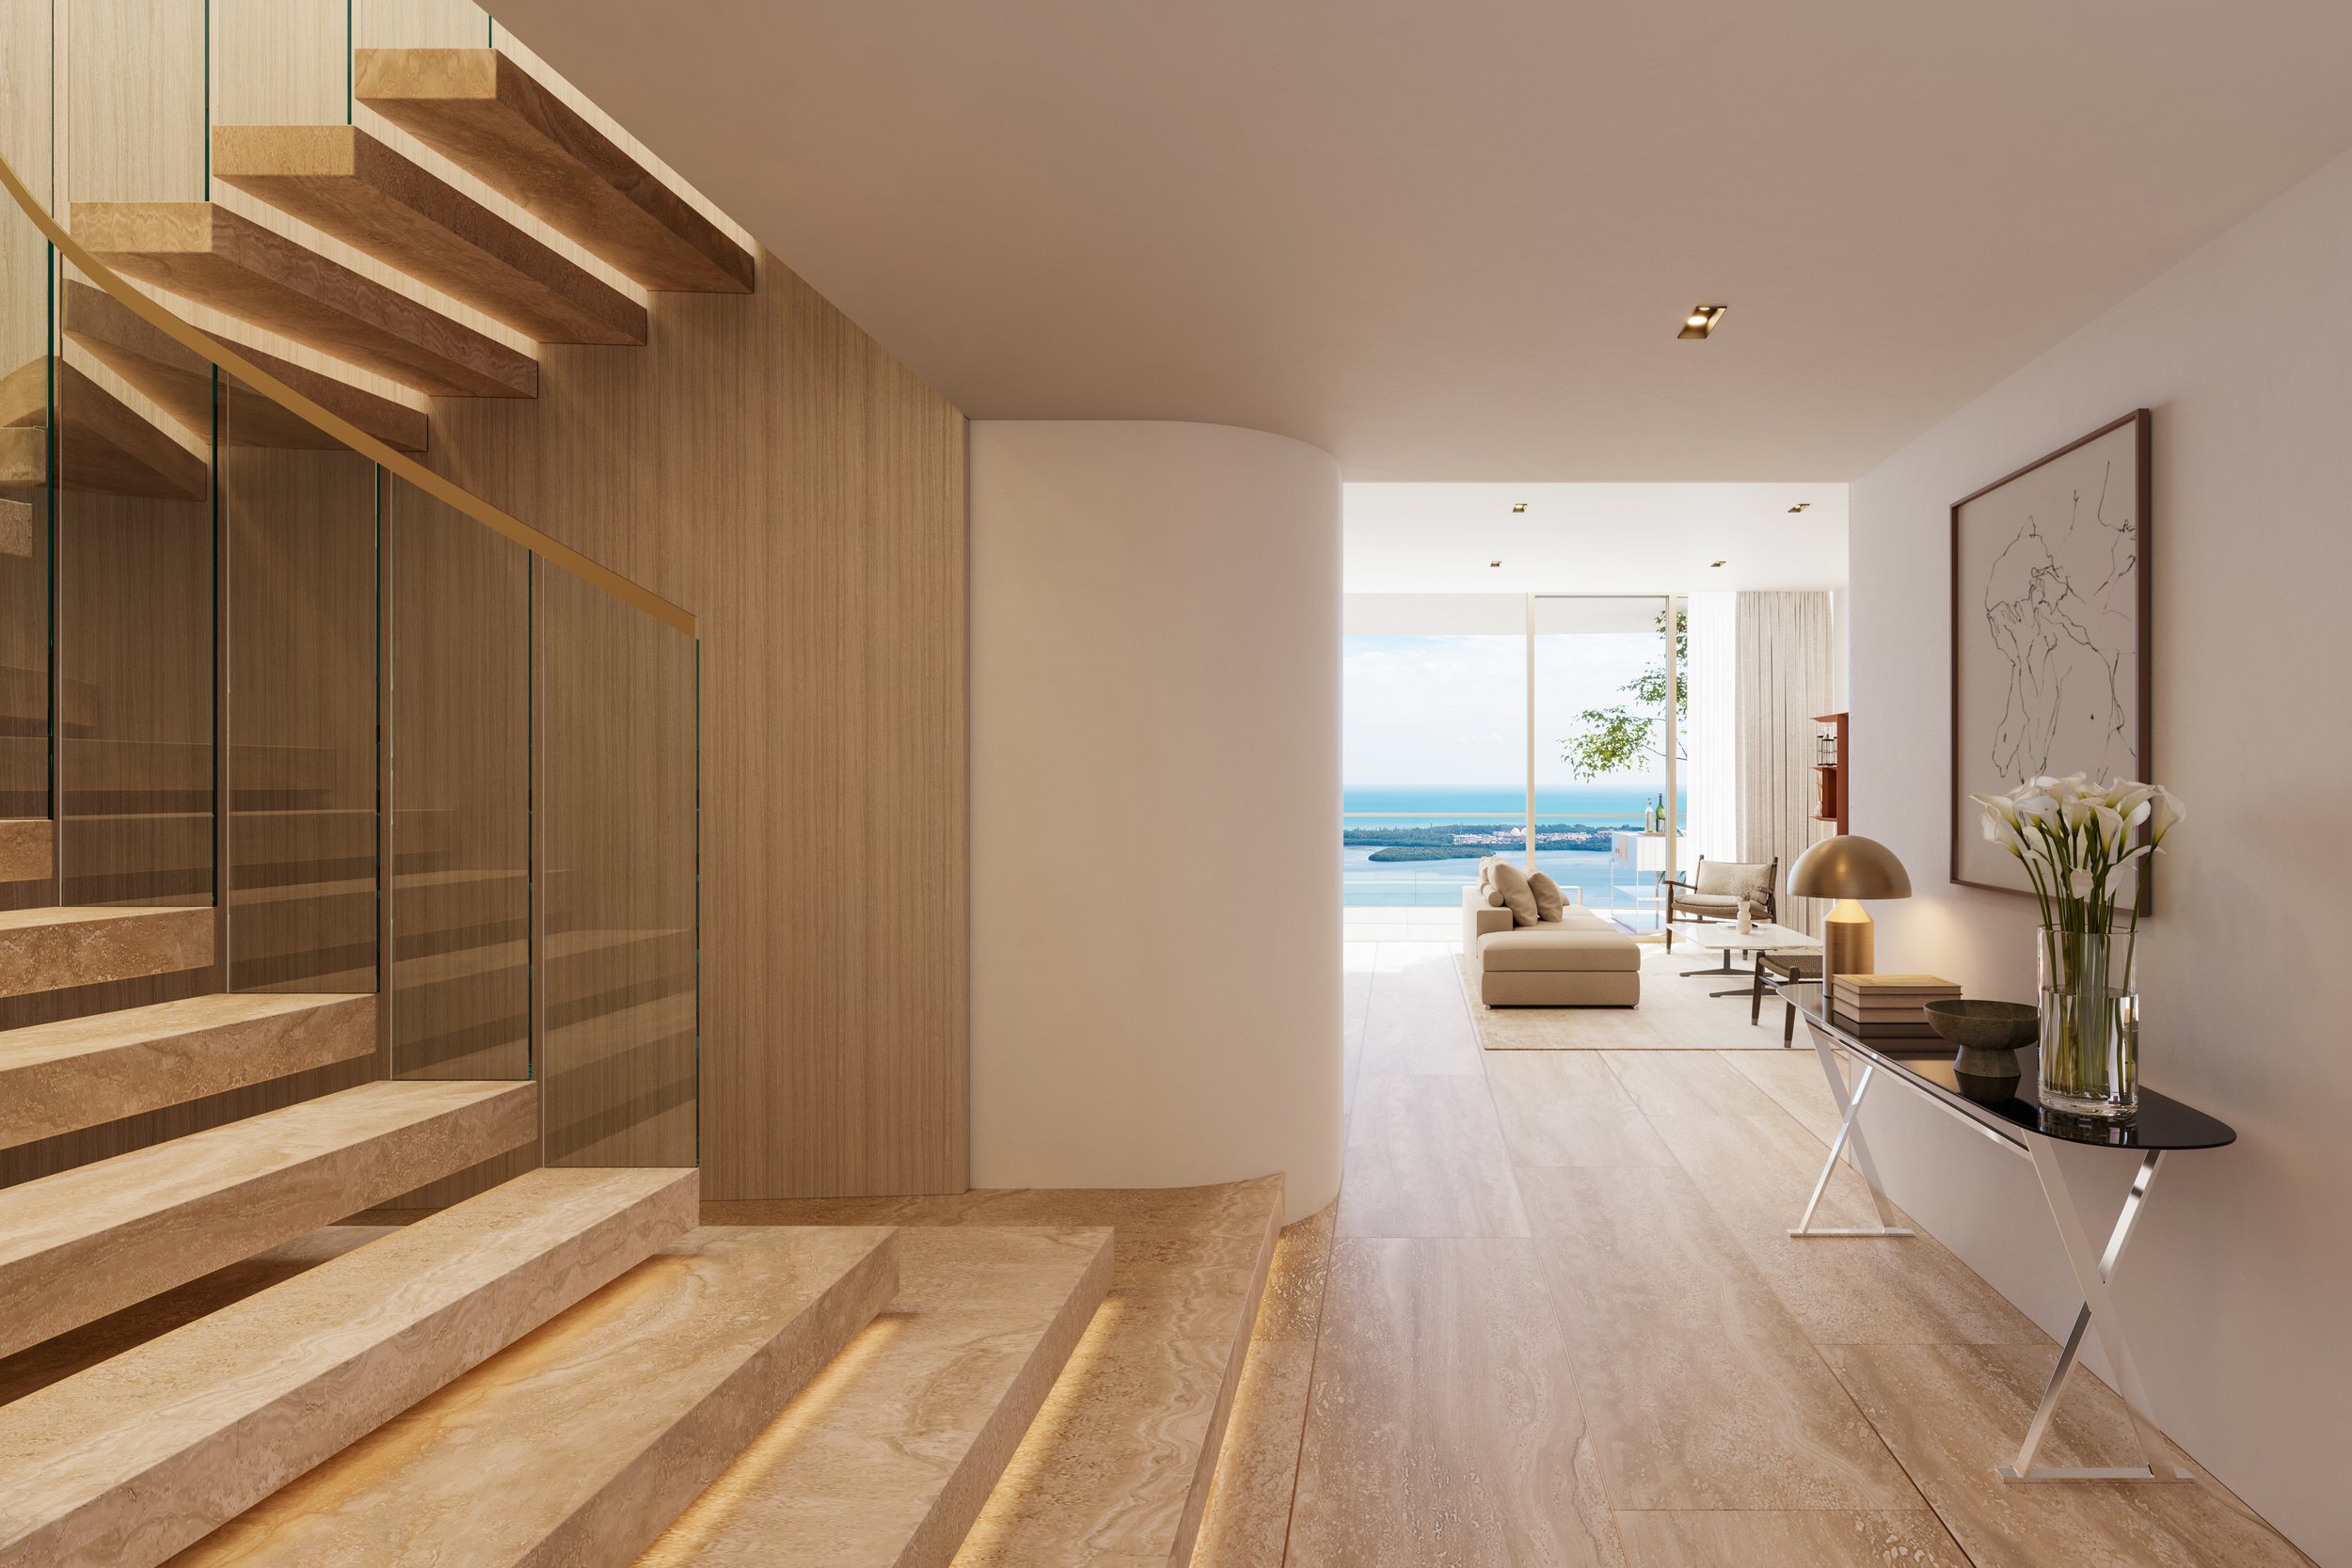 Unit C Staircase - The Residences at 1428 Brickell.jpg